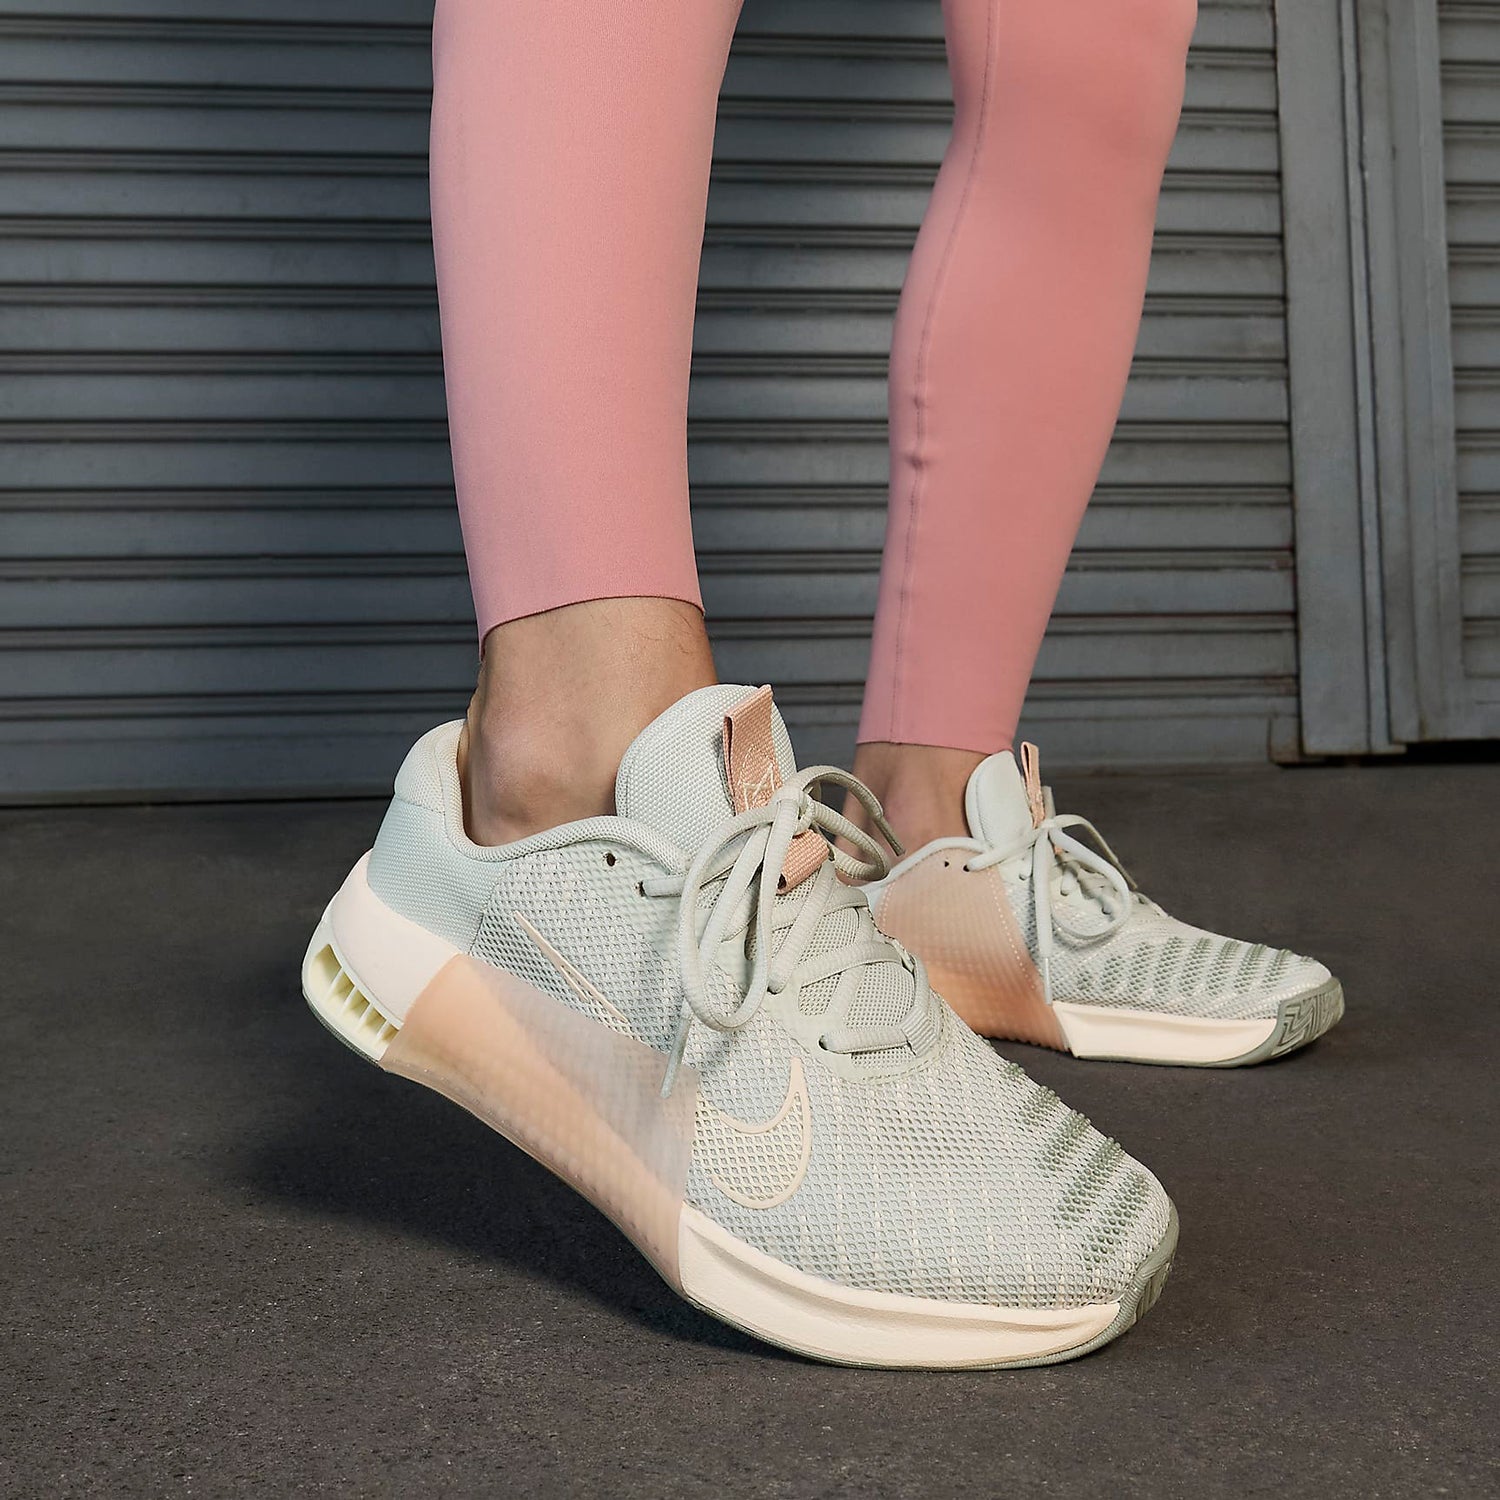 Woman Shoes for CrossFit Nike Metcon 9 - white pink